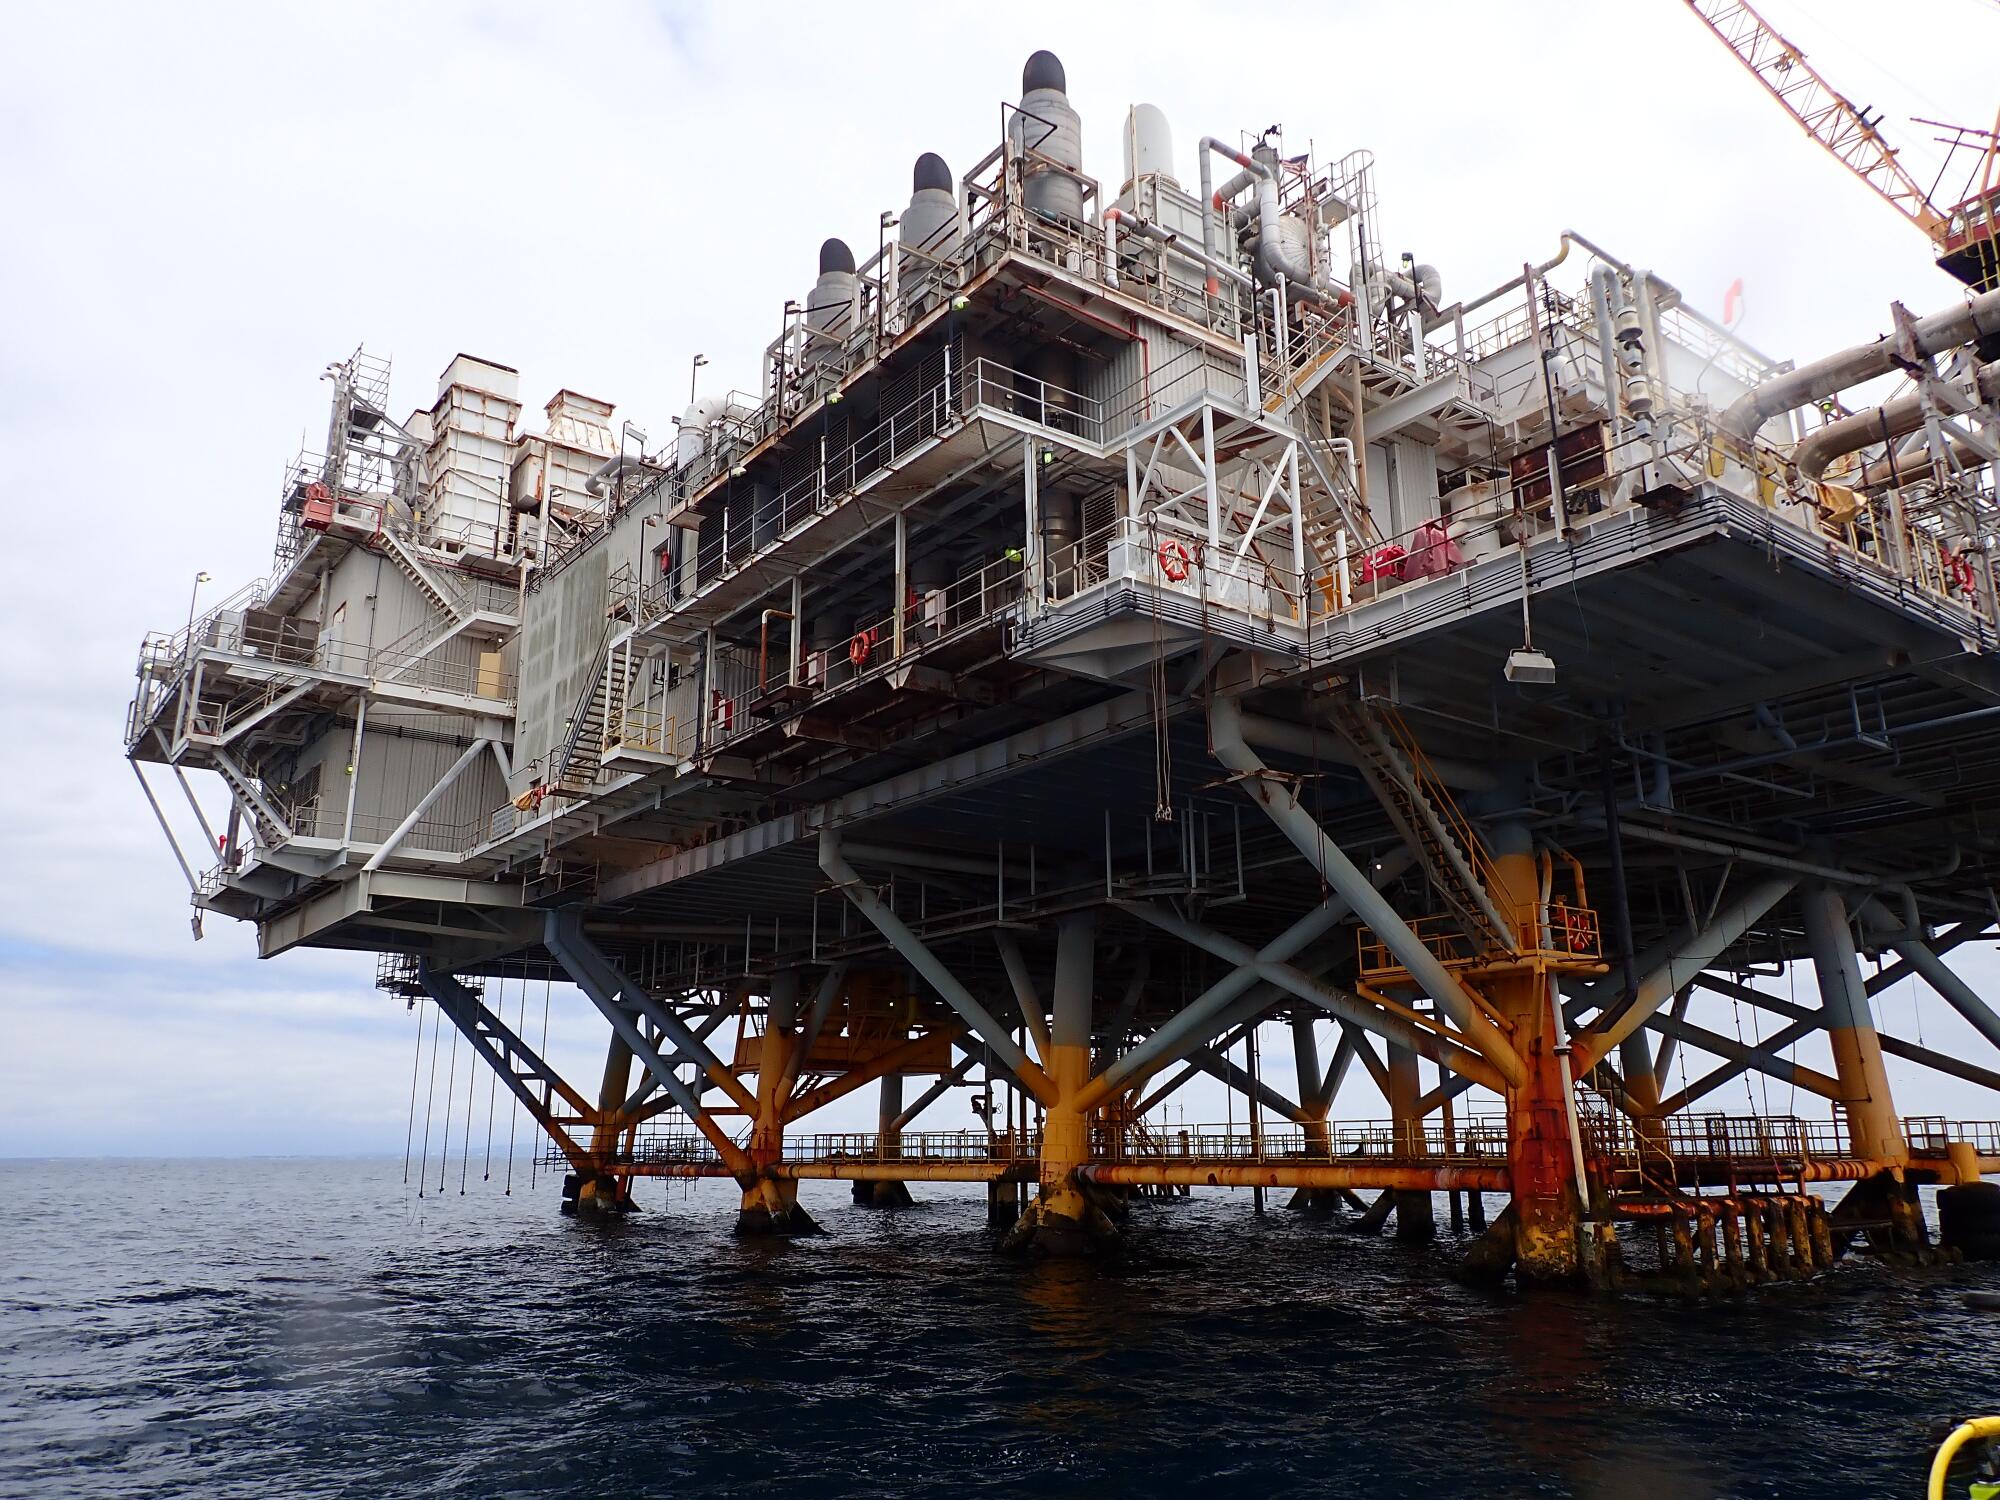 Photos of the oil platform Elly taken by Paige Zhang